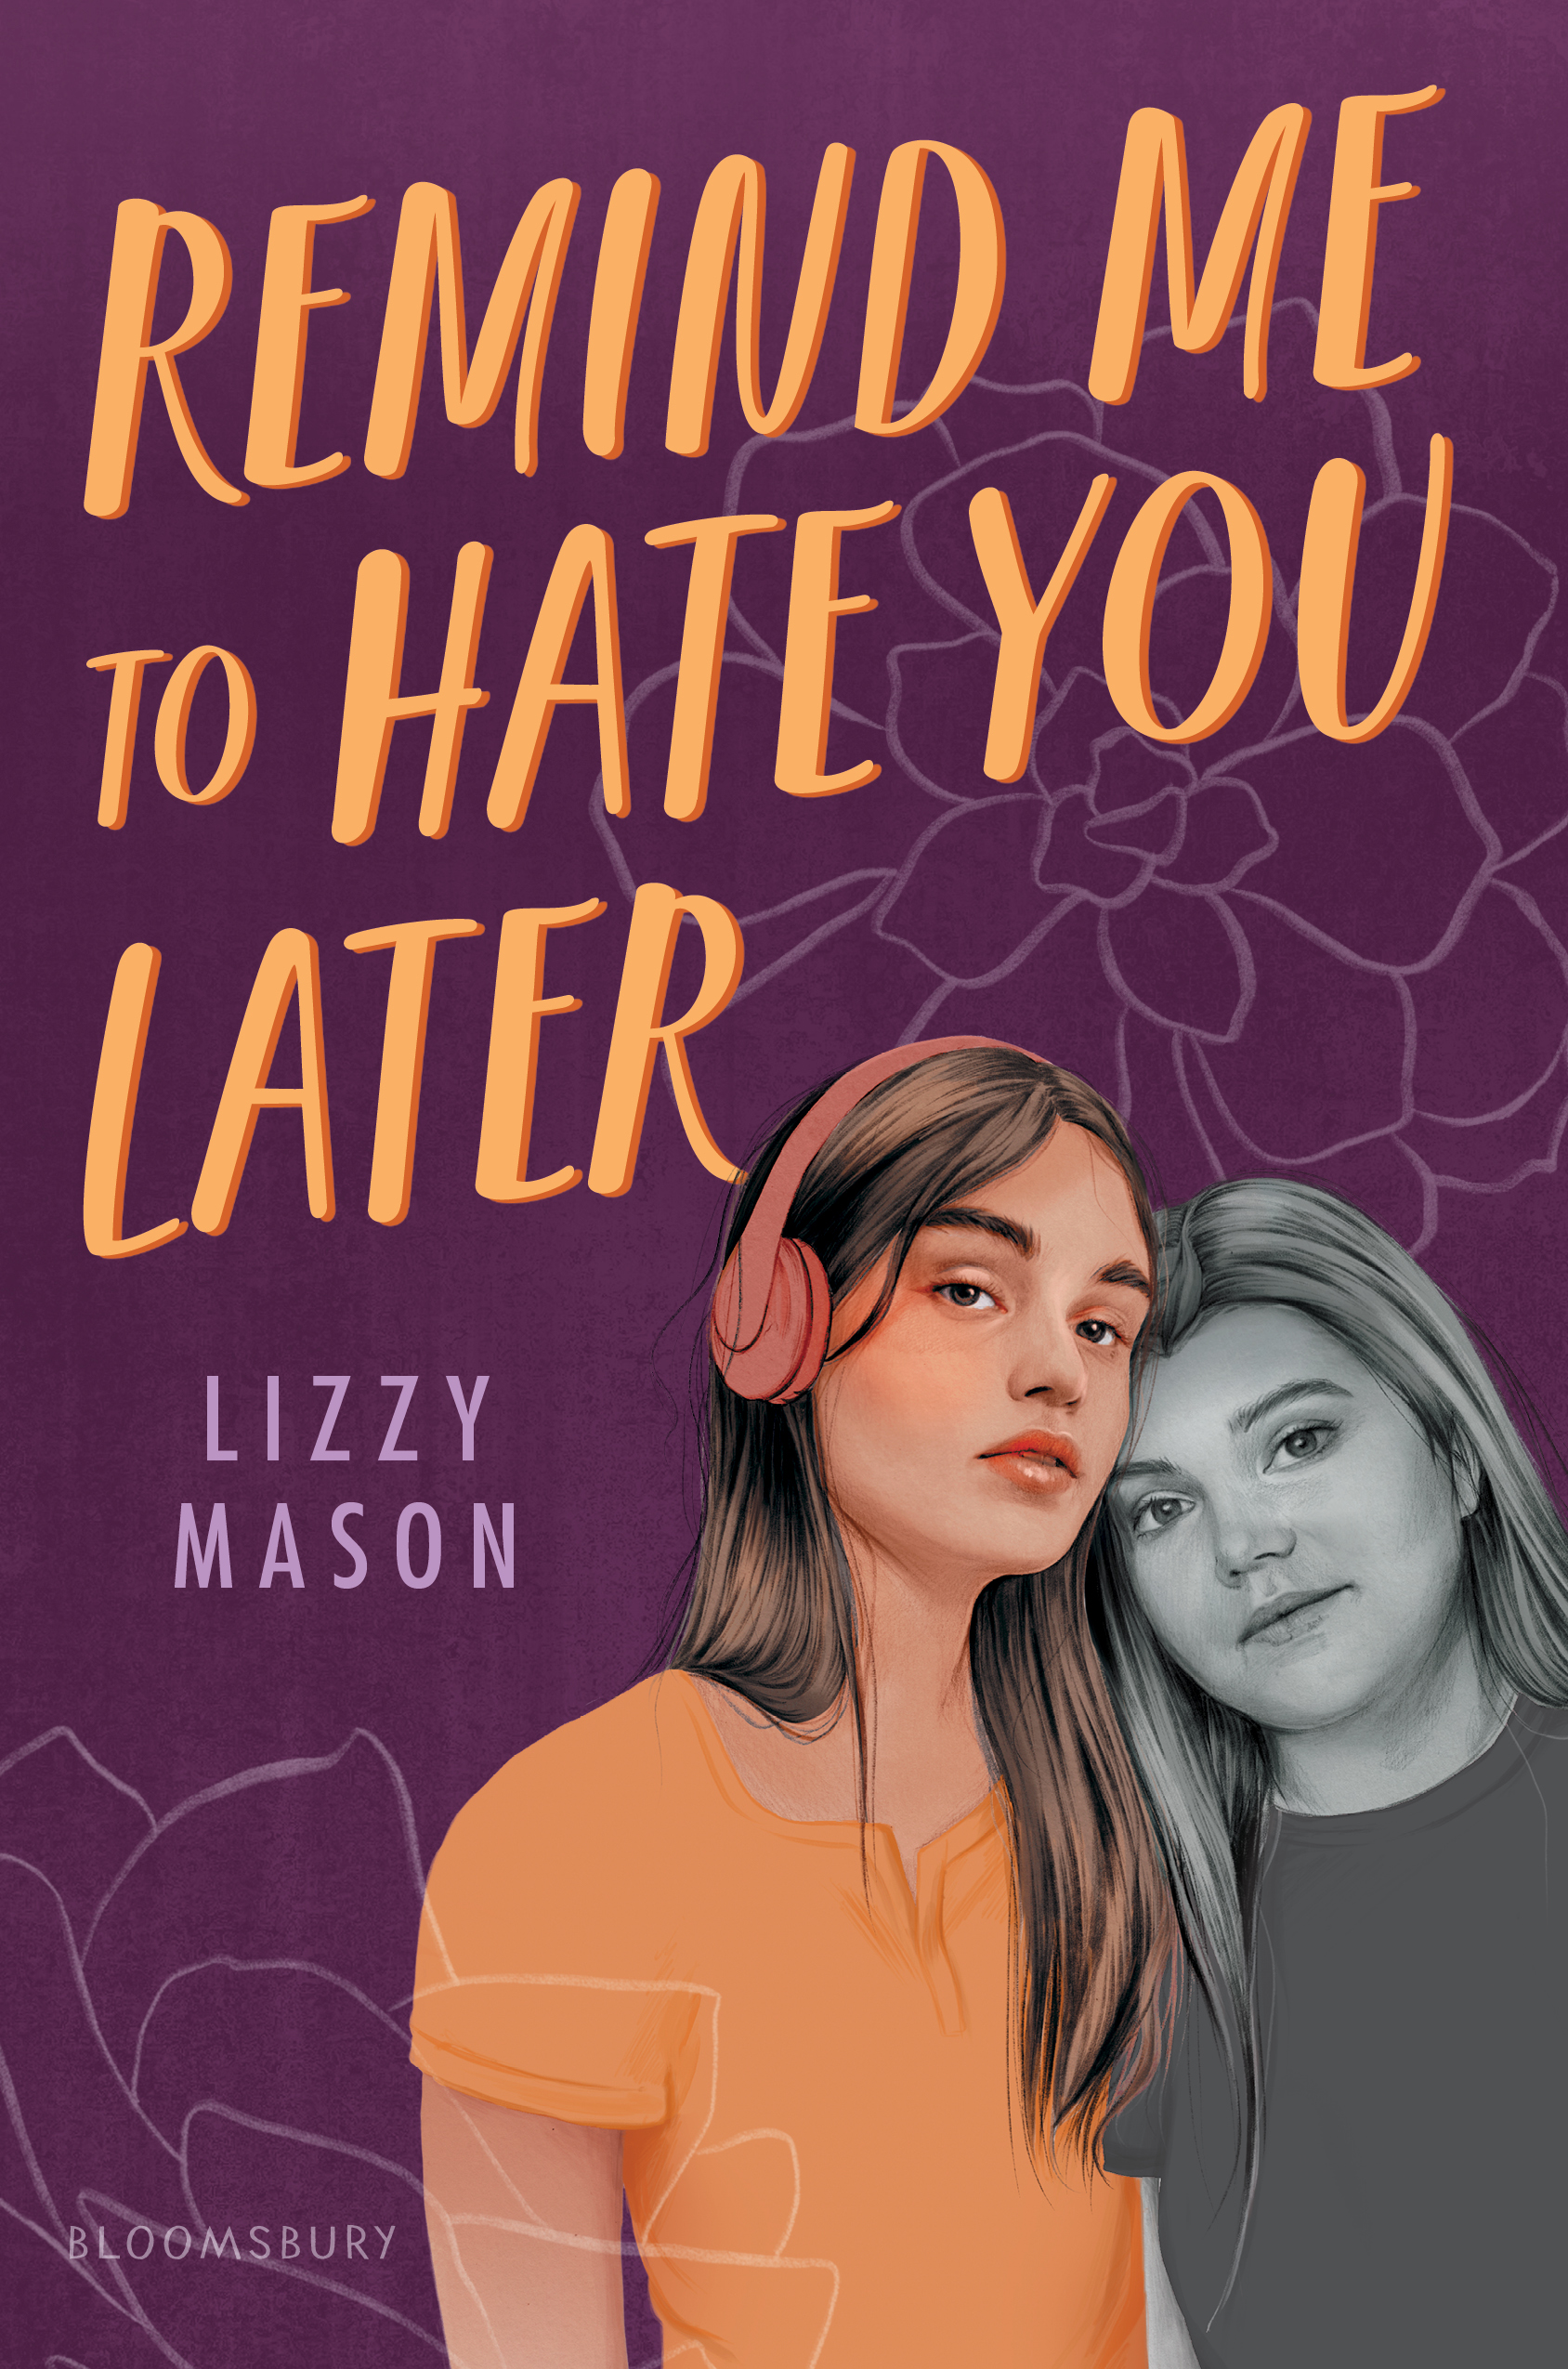 Writing About Suicide While Suicidal, a guest post by Lizzy Mason